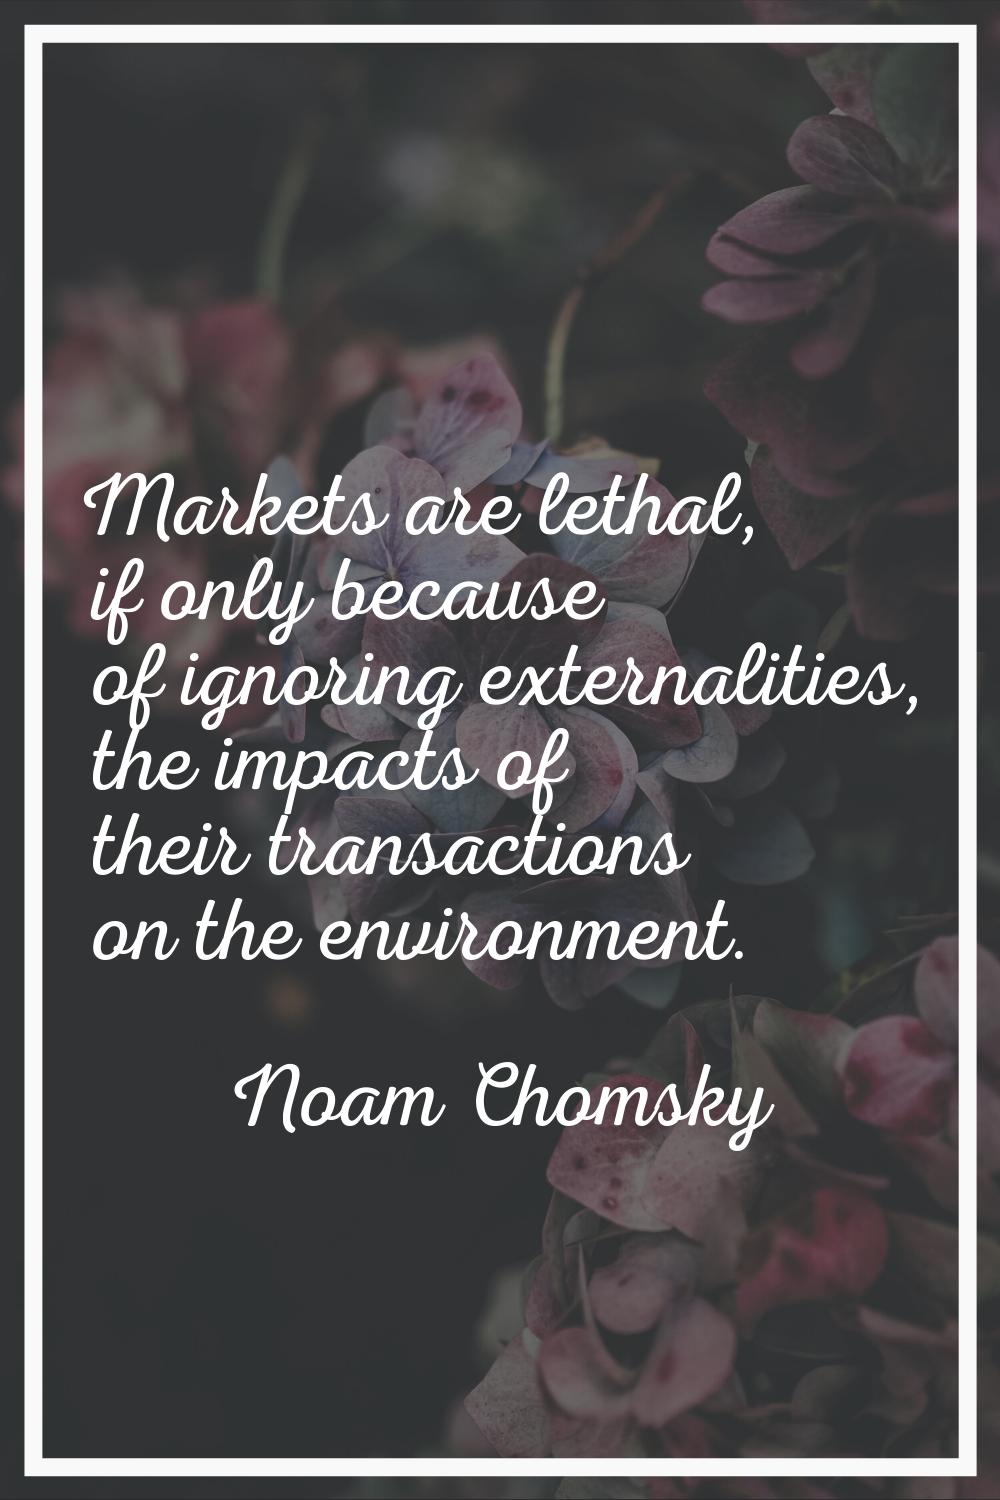 Markets are lethal, if only because of ignoring externalities, the impacts of their transactions on